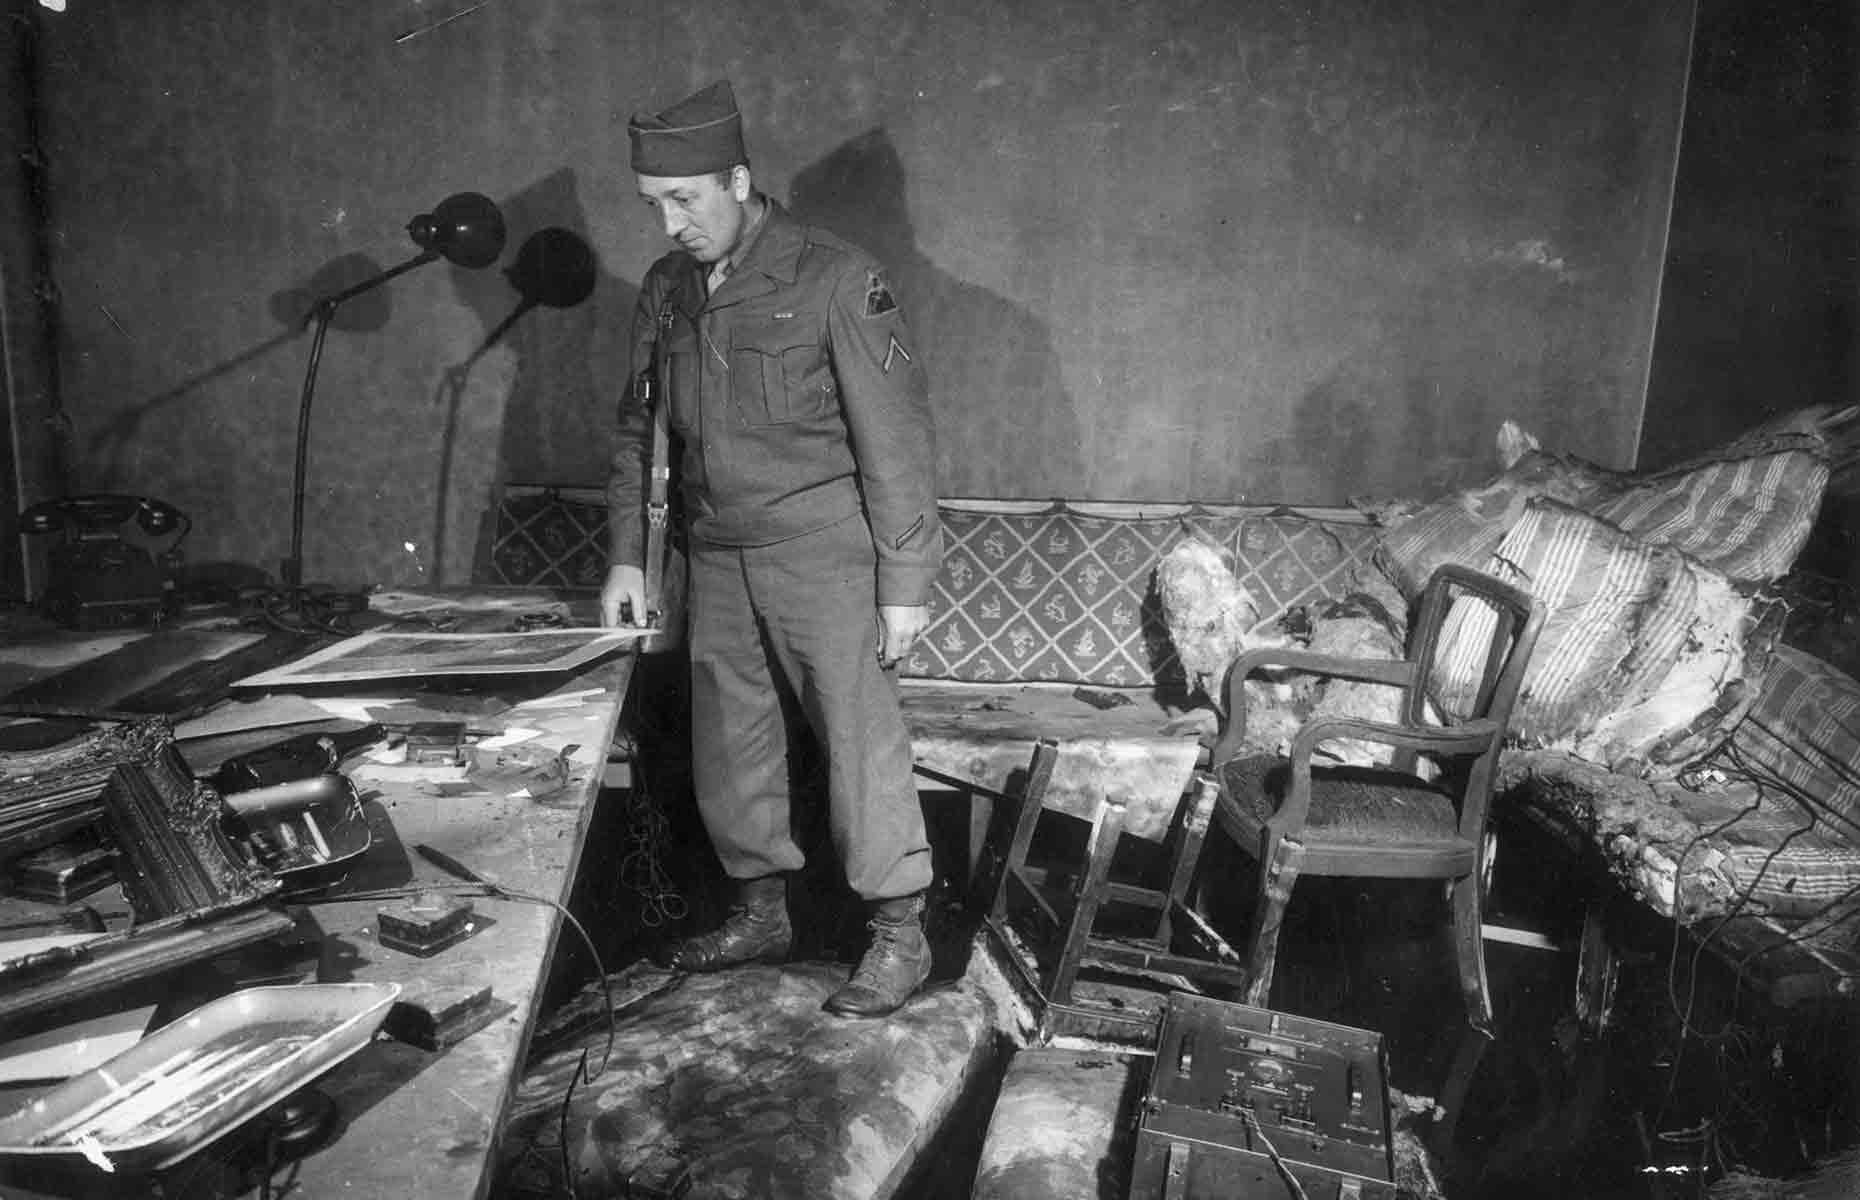 <p>Shortly after they were declared dead, the Red Army began shelling the area around the Reich Chancellery. This photo shows Private First Class Richard Blust of Michigan examining the bunker following their deaths. A fire had destroyed much of the room's contents, but you can still make out an ornate gilded sofa.</p>